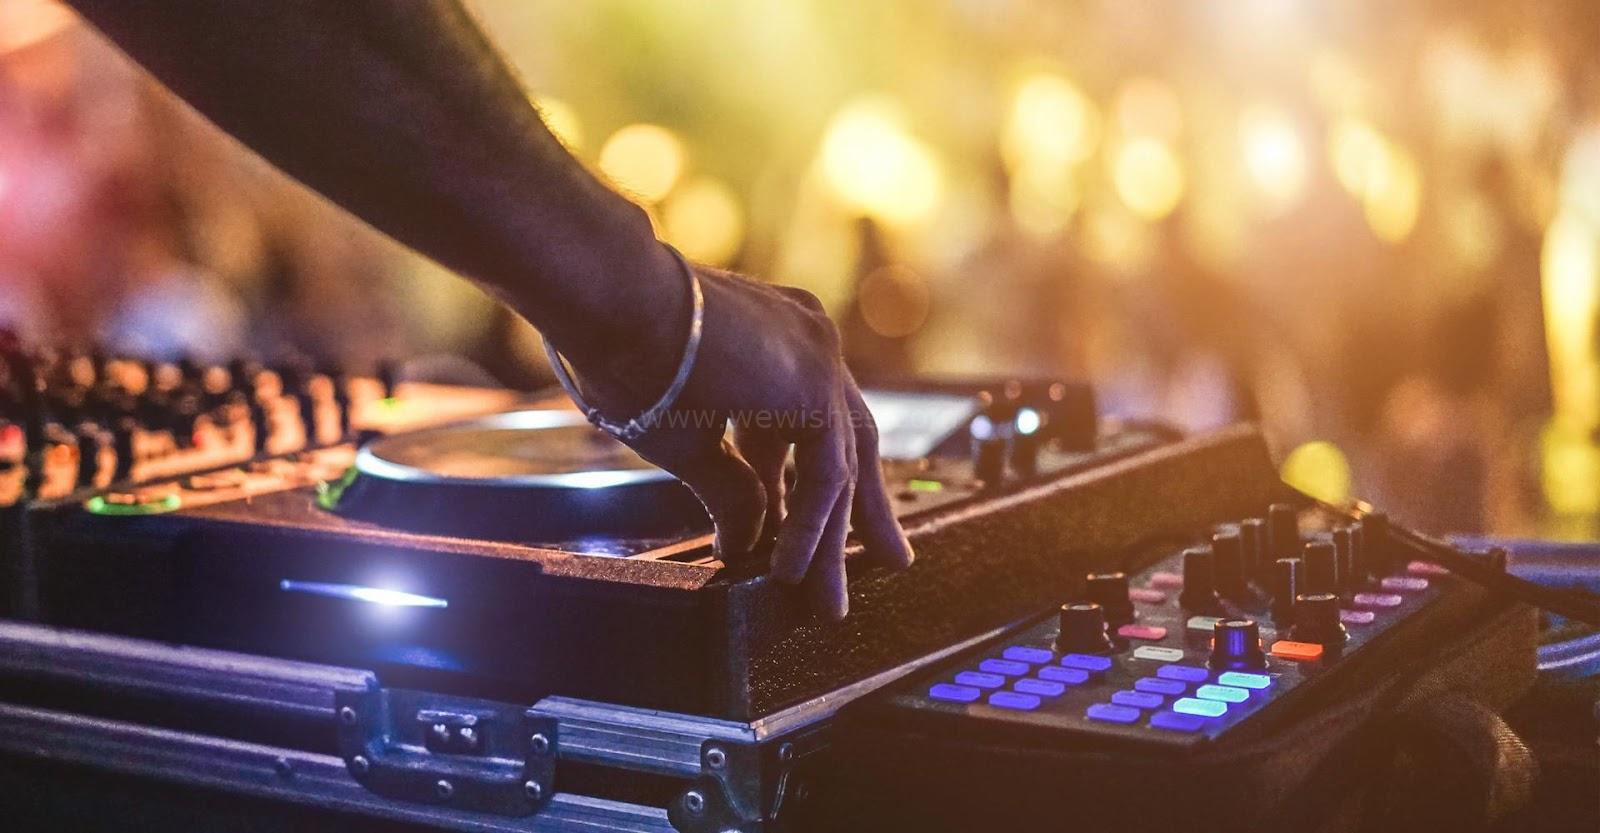 How to Determine What Kind of Music Your Party Guests Will Enjoy